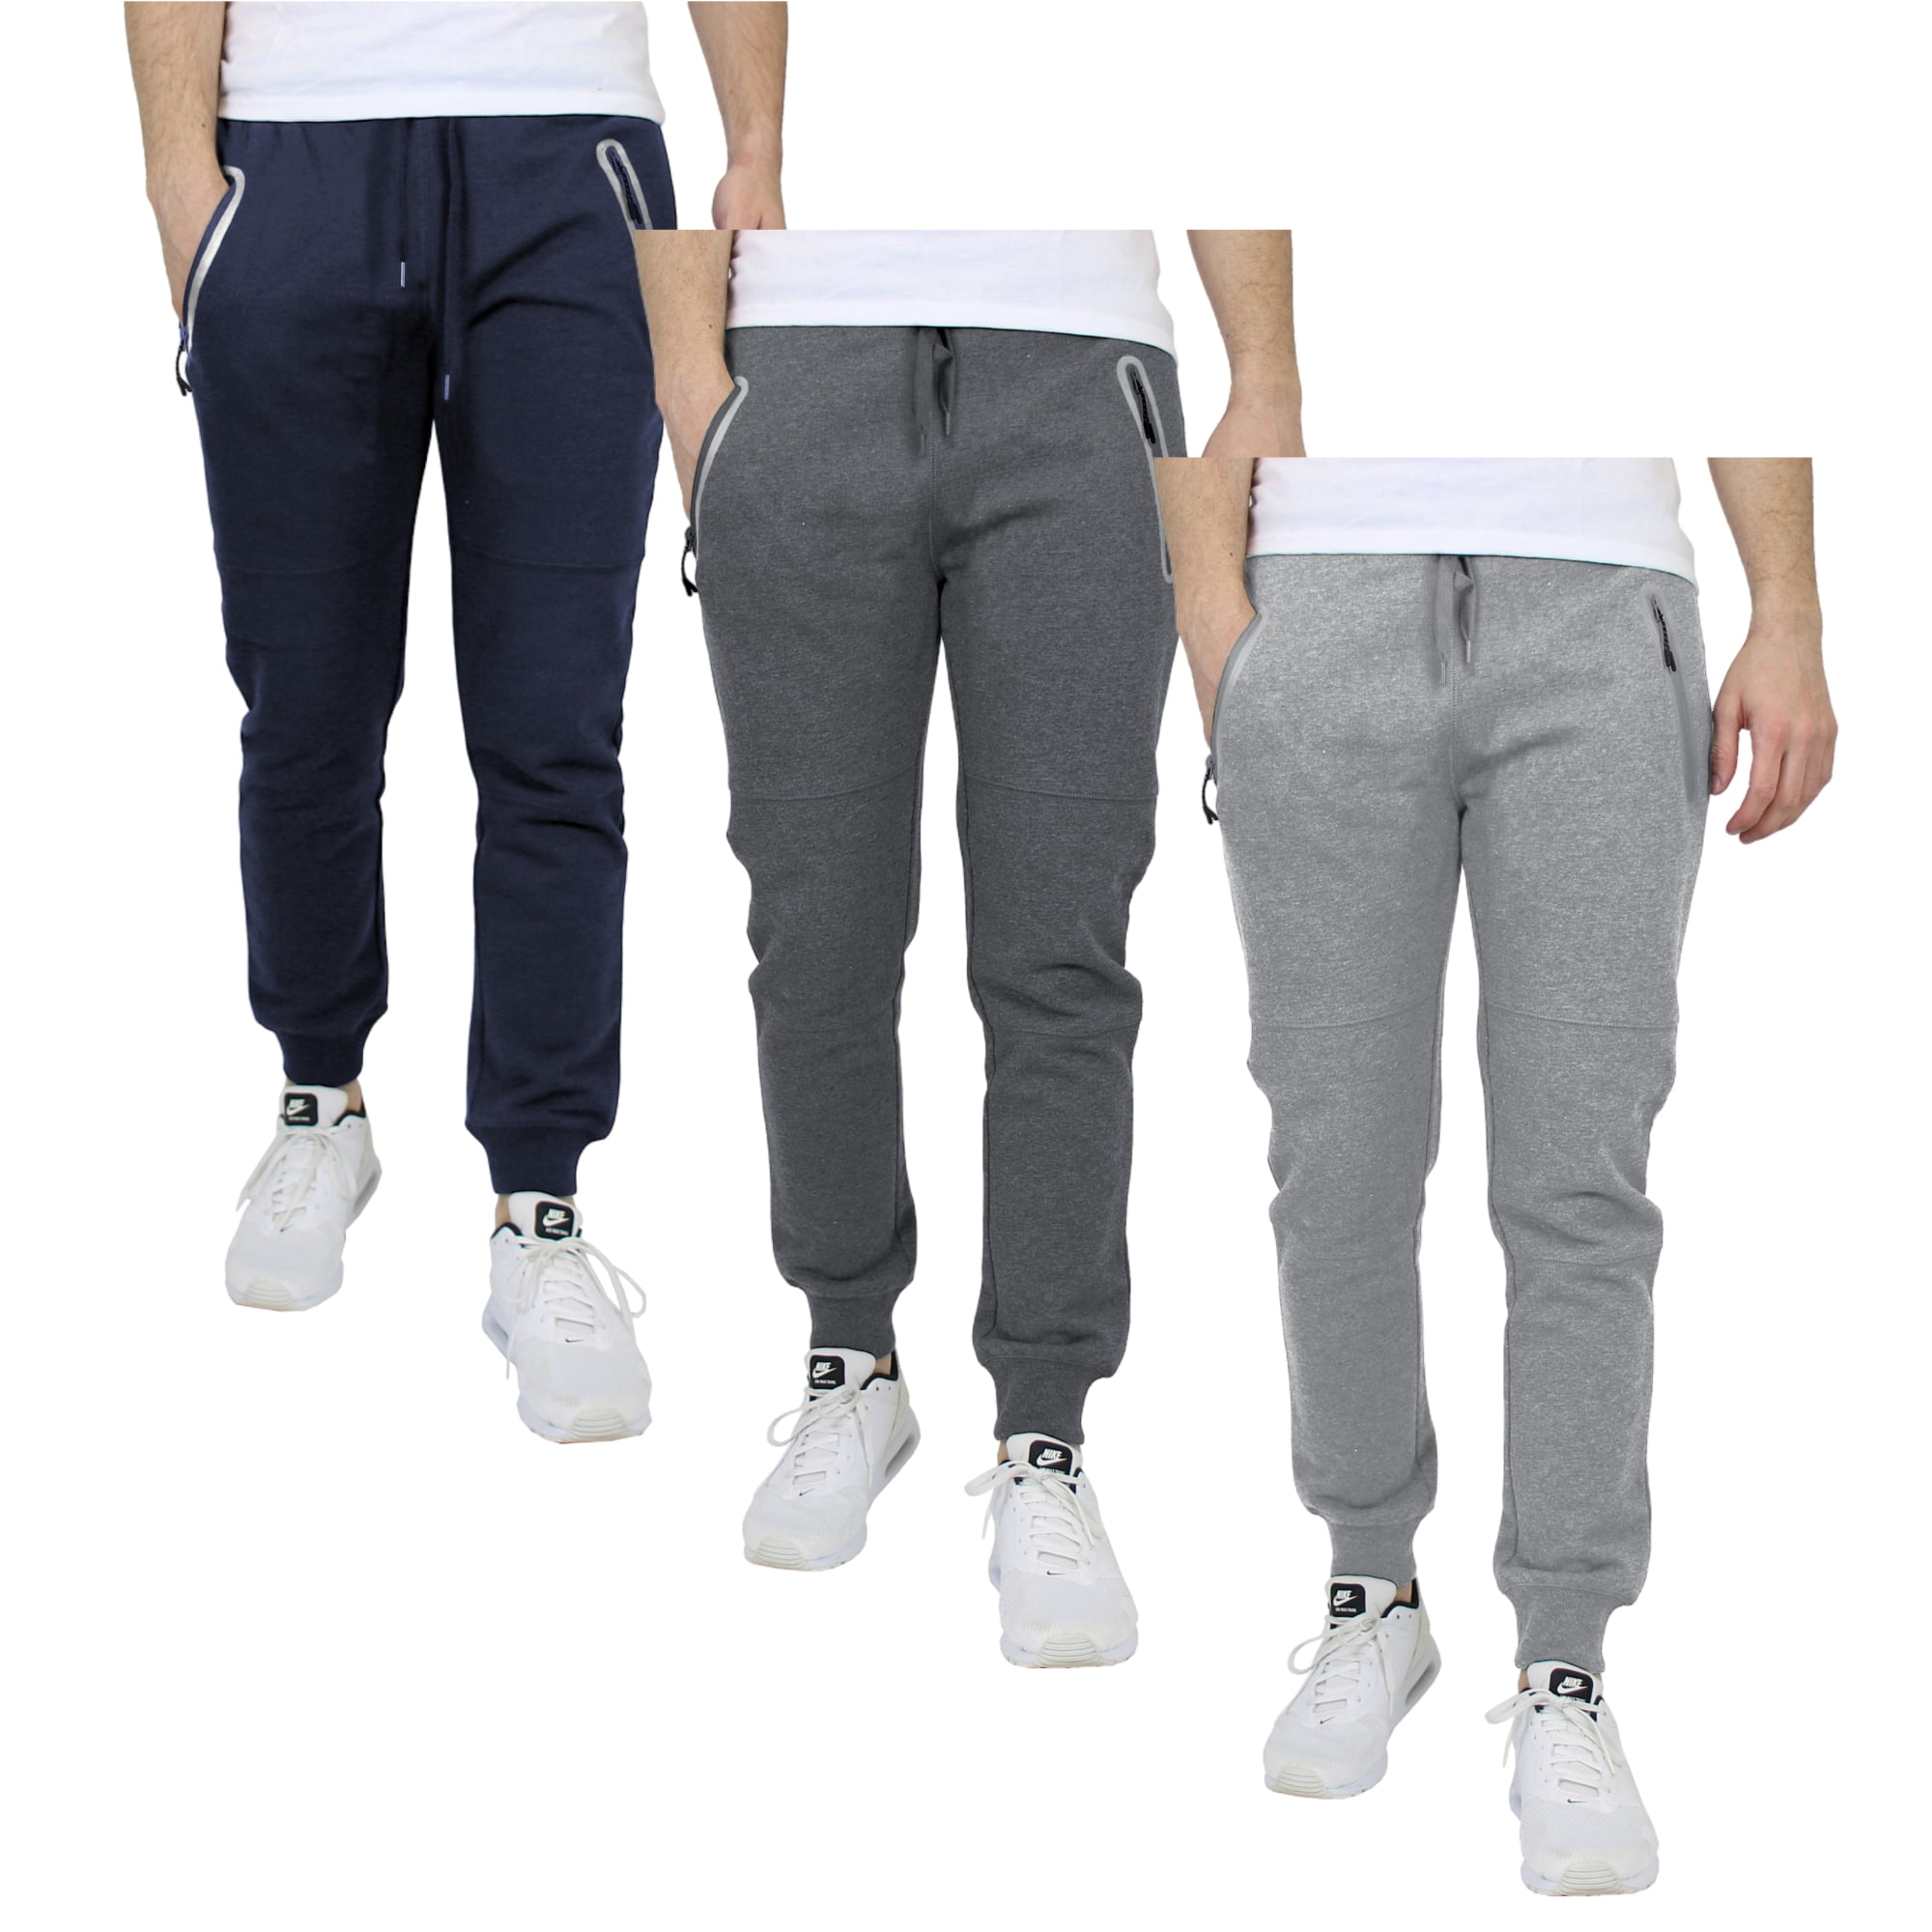 Galaxy by Harvic 3-Pack Mens Slim Fit Fleece Jogger Sweatpants (S-2XL ...